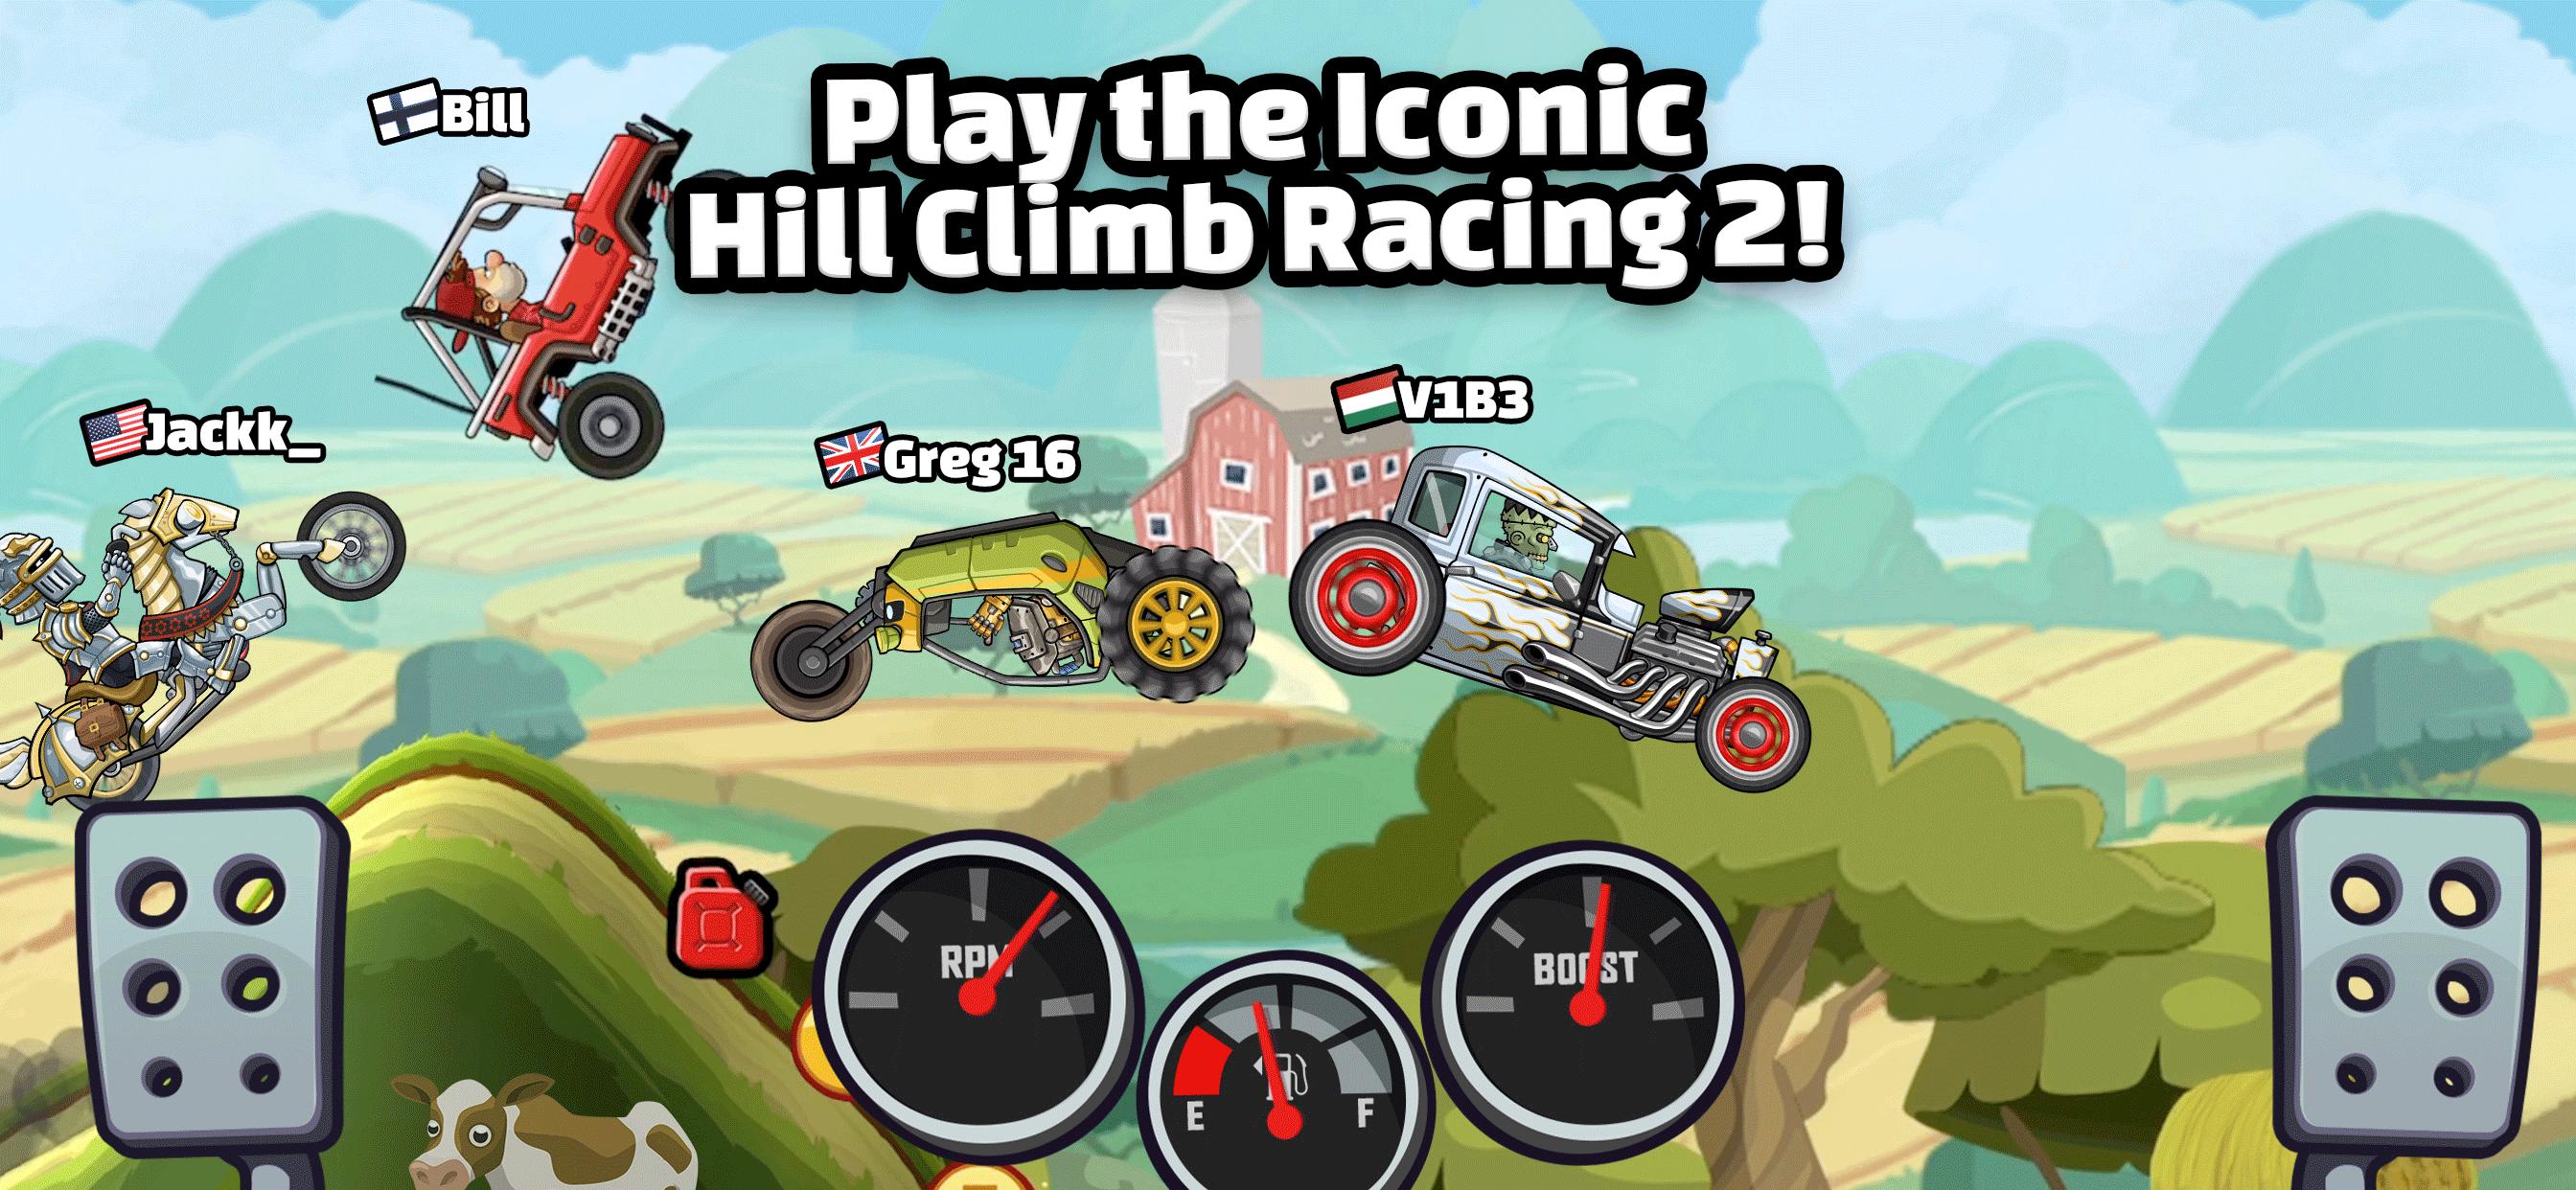 Hill Climb Racing - The new update for Hill Climb Racing 2 is out now for  all platforms!